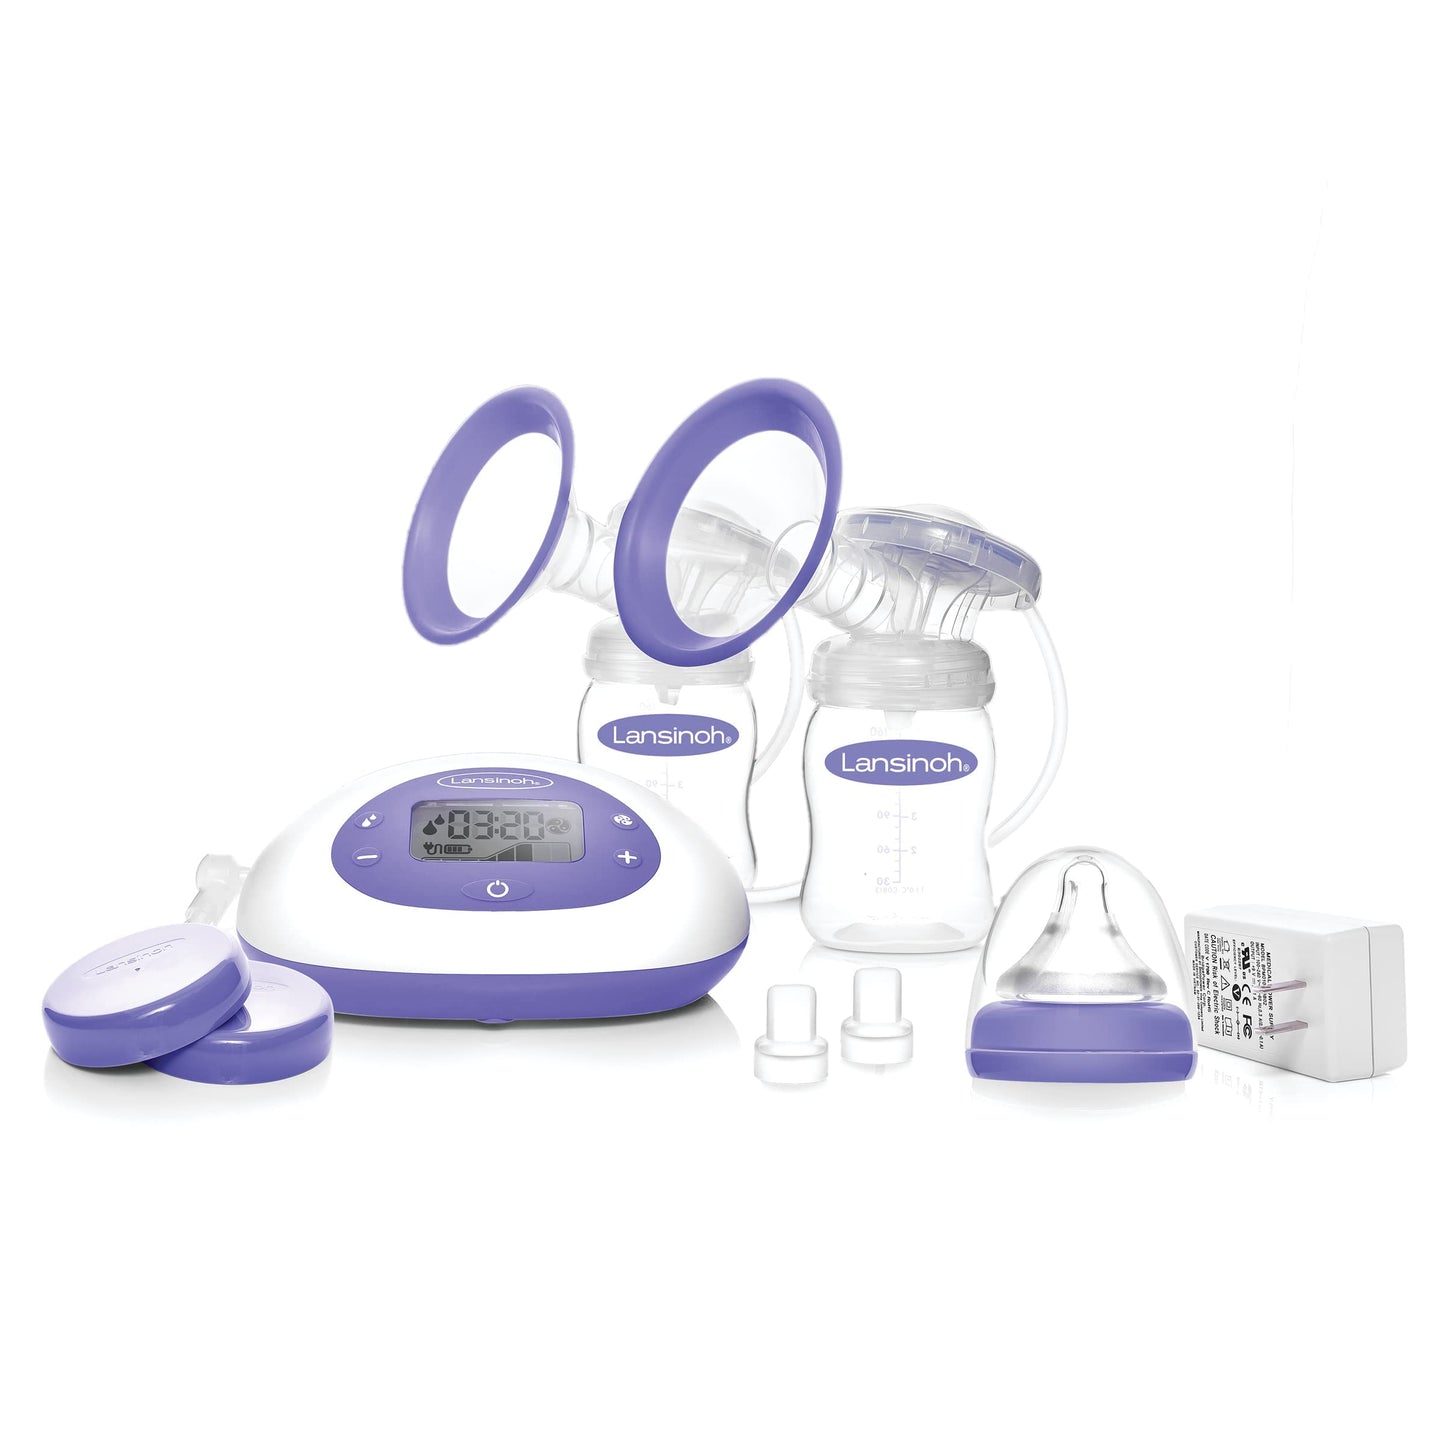 New Lansinoh Signature Pro Double Electric Breast Pump